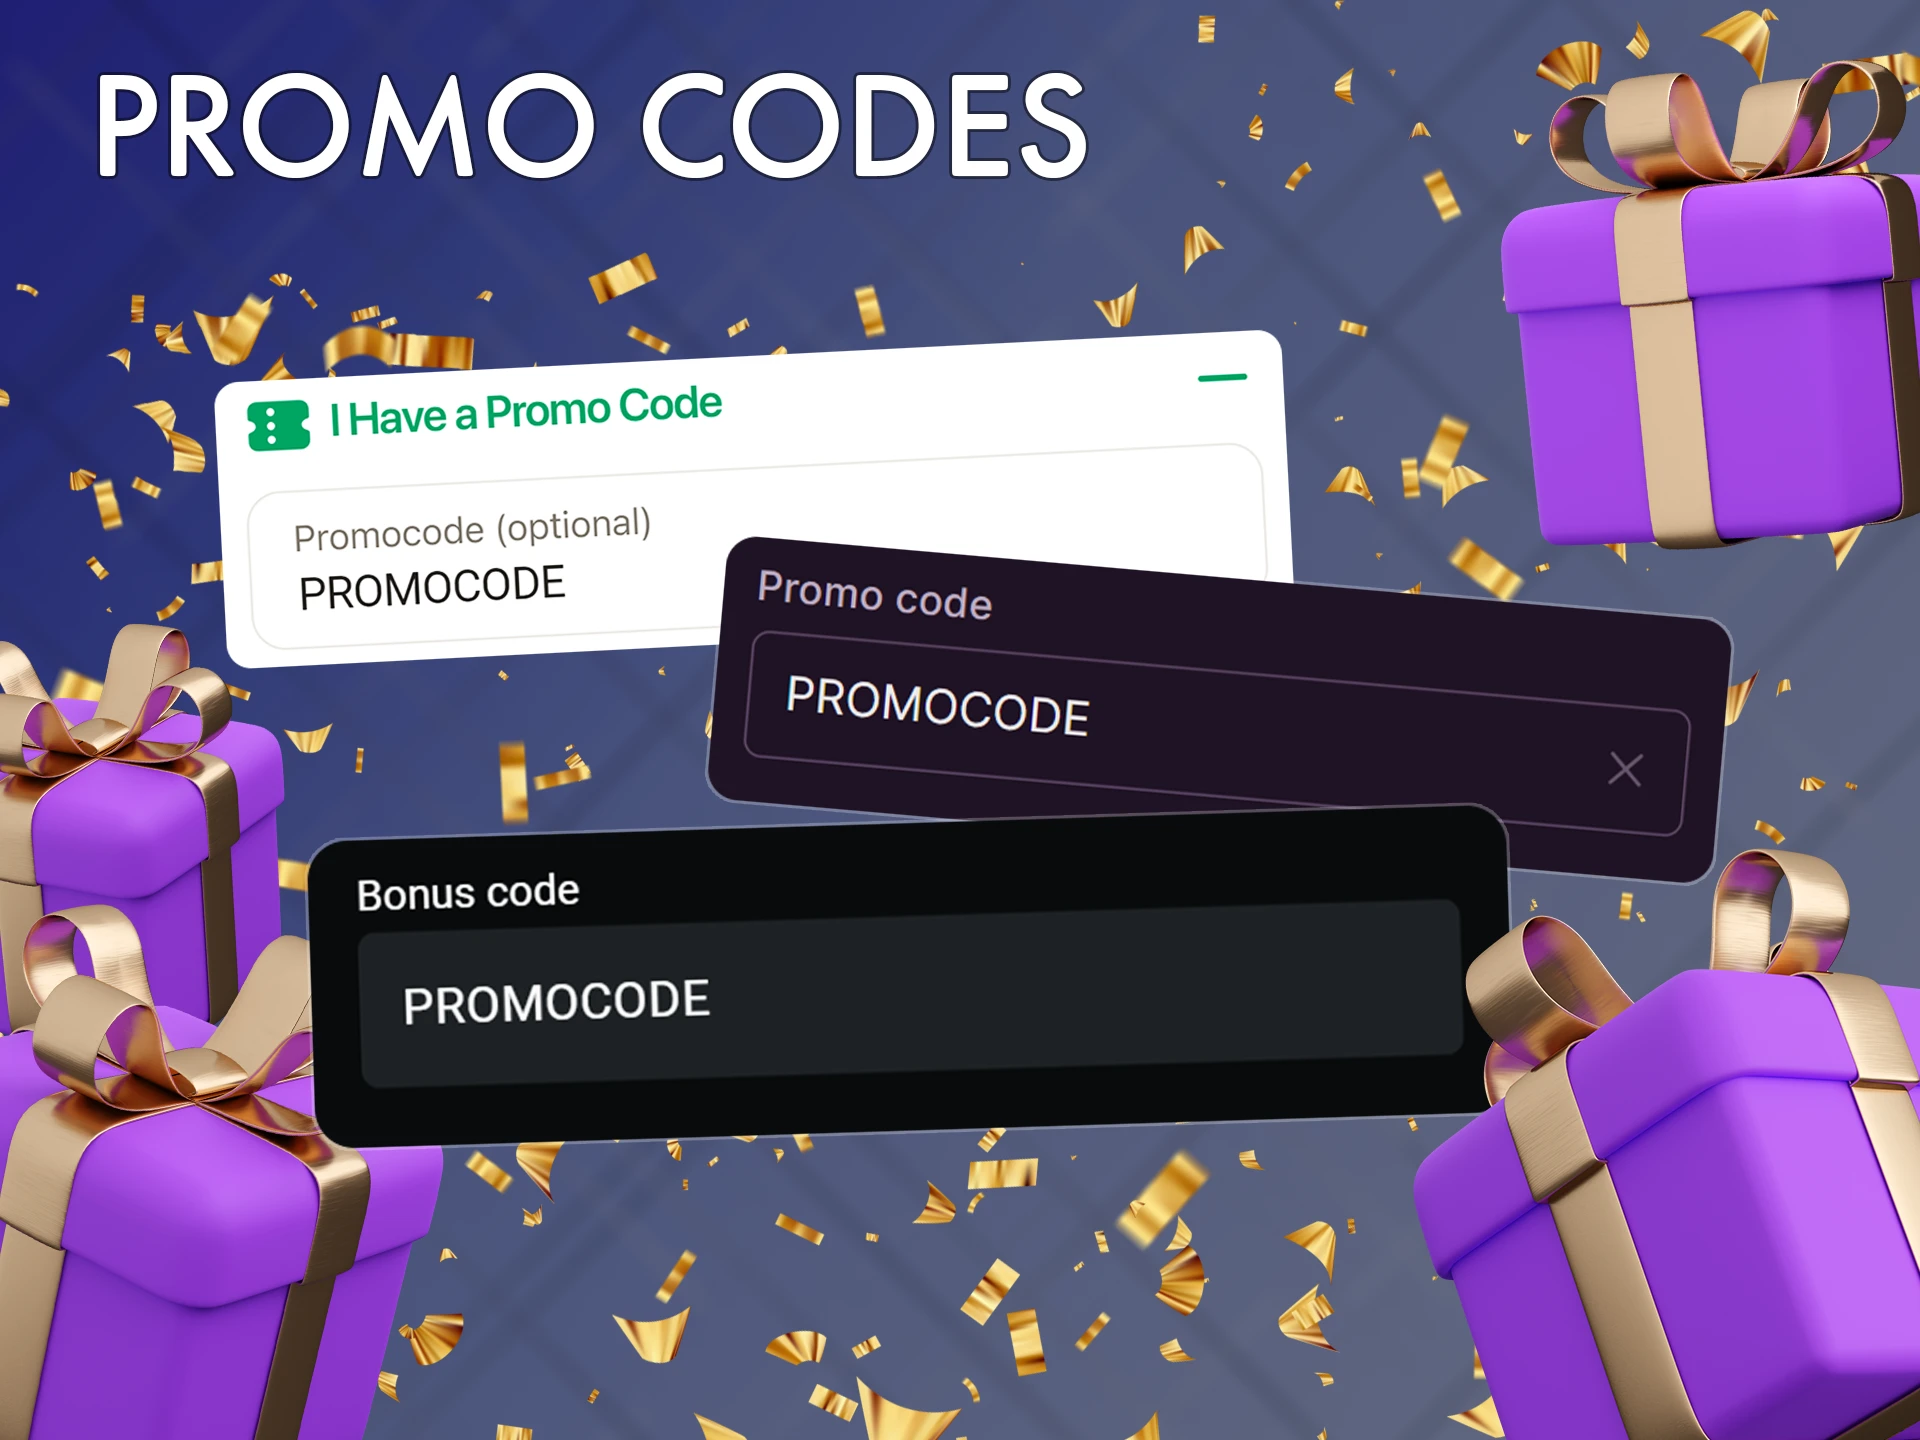 If you have a promo code, be sure to use it.